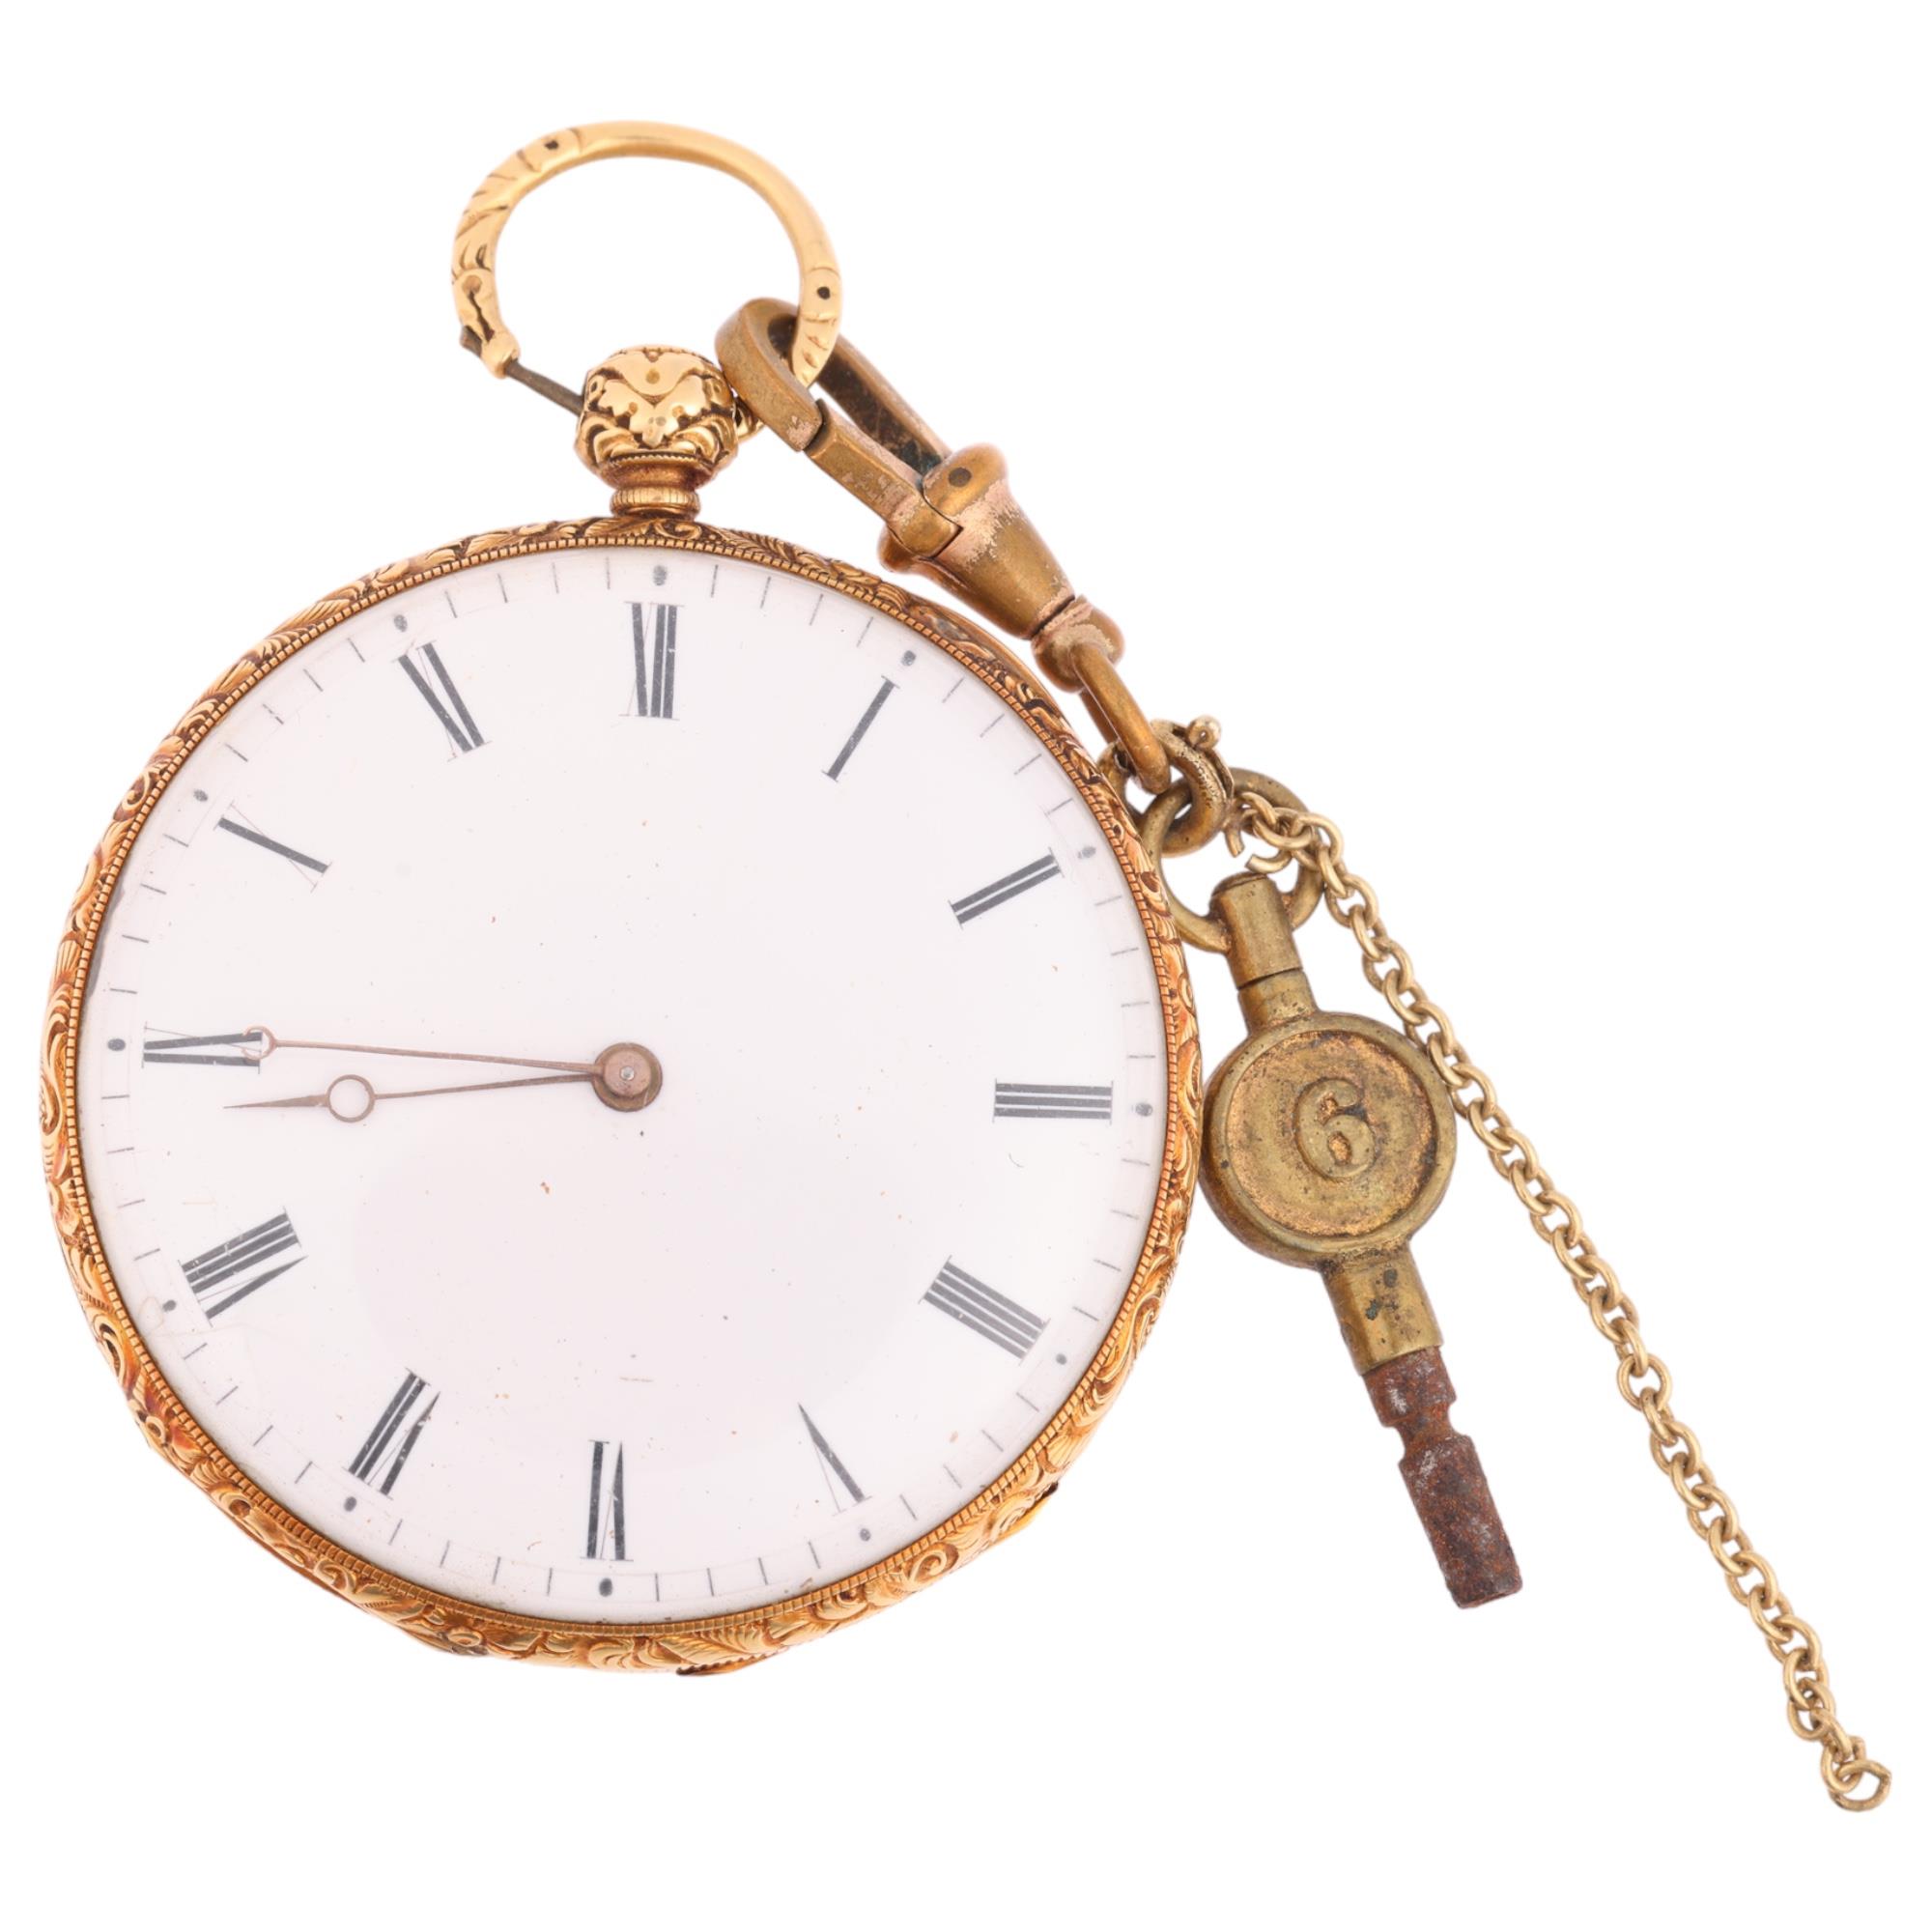 A 19th century open-face key-wind pocket watch, white enamel dial with Roman numeral hour markers,